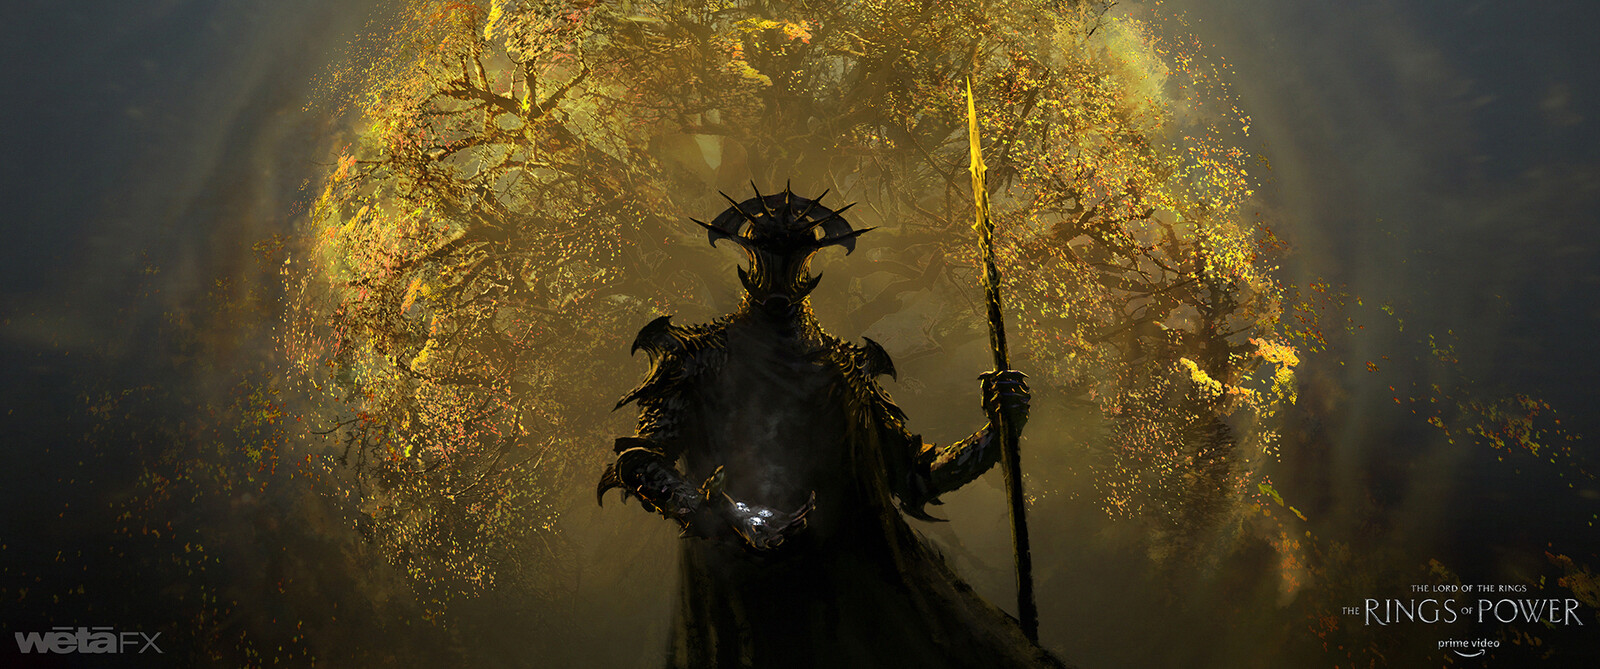 Concept for the first frame in a shot where Morgoth closes his fist around the Silmarils as the tree's light behind him is extinguished, fade to black.